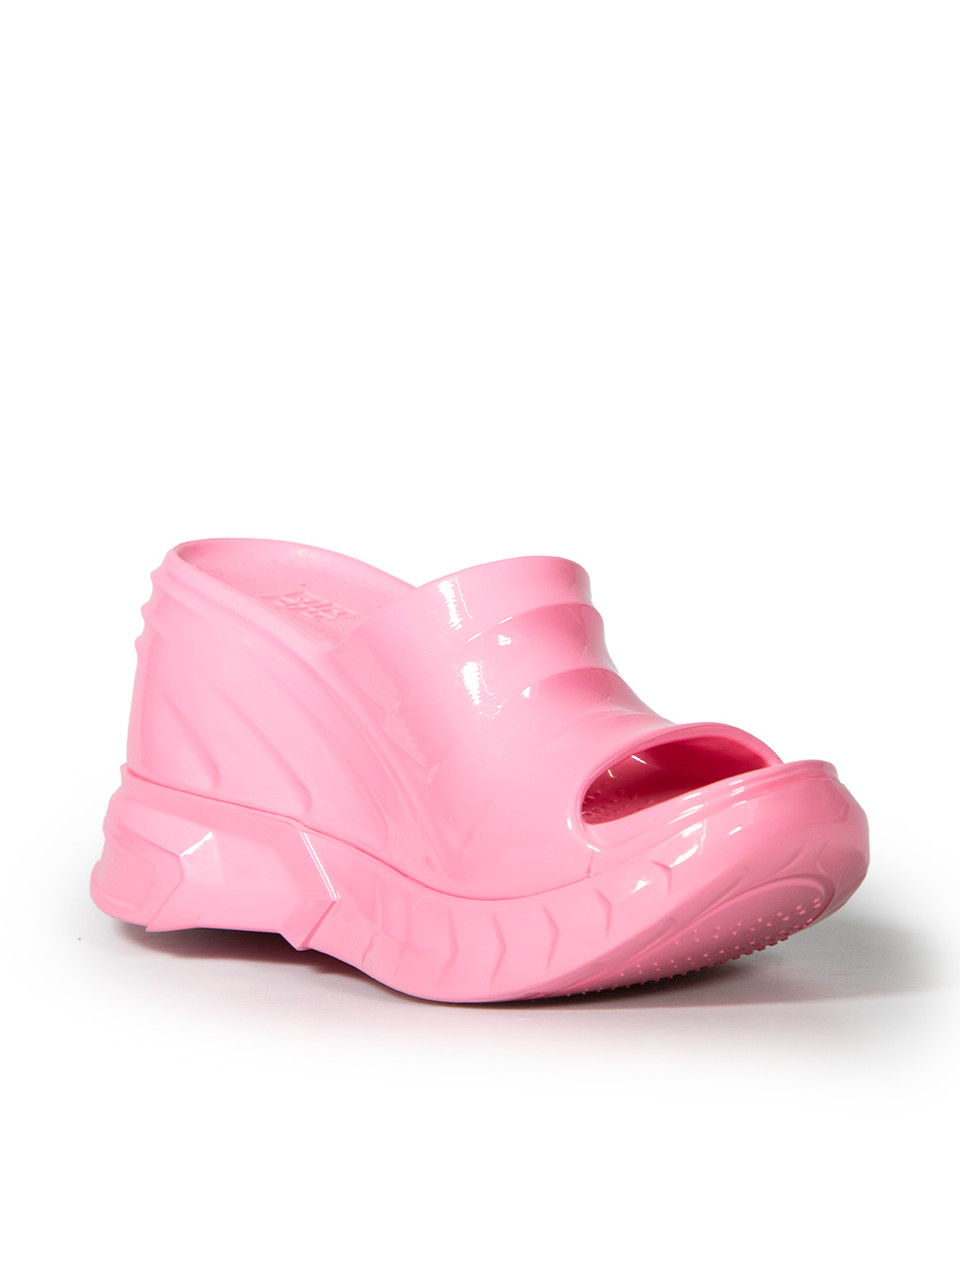 Givenchy Pink Marshmallow Platform Wedge Sandals